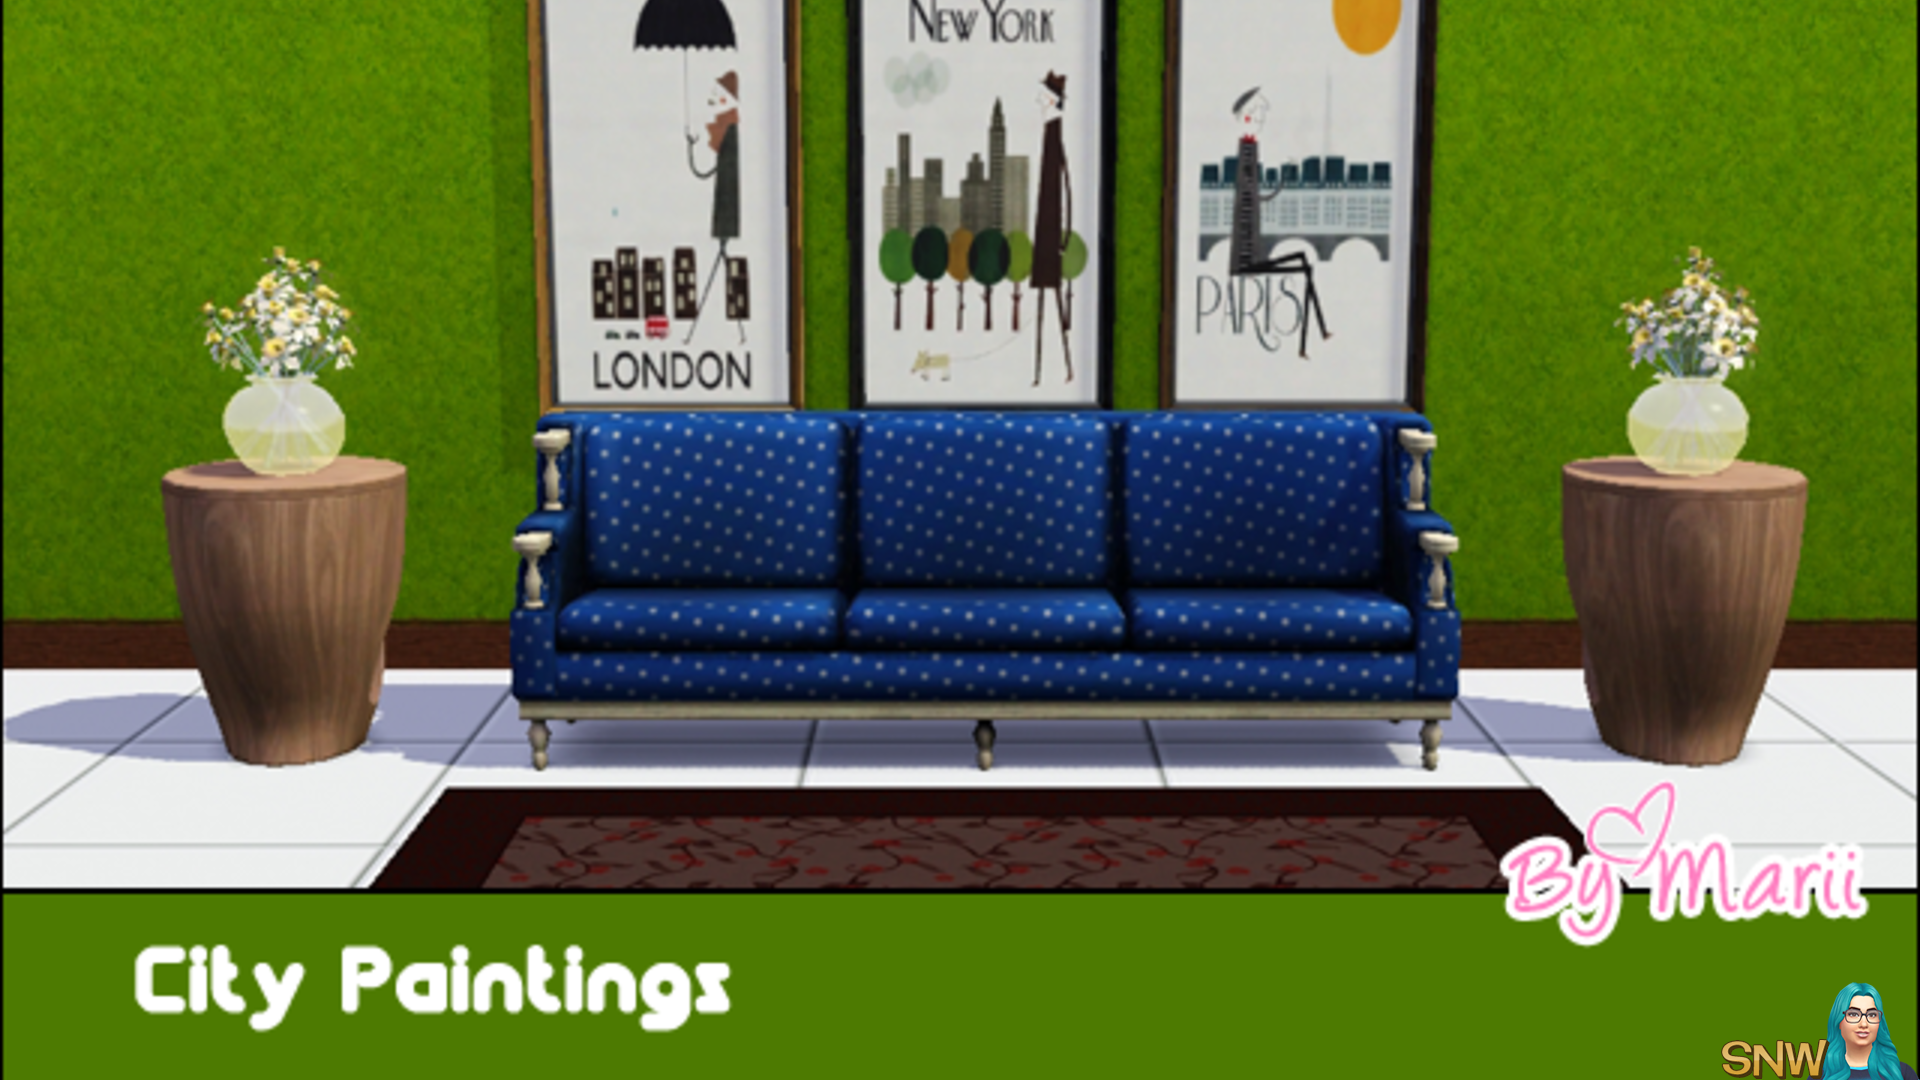 Sims 3: City Paintings set 